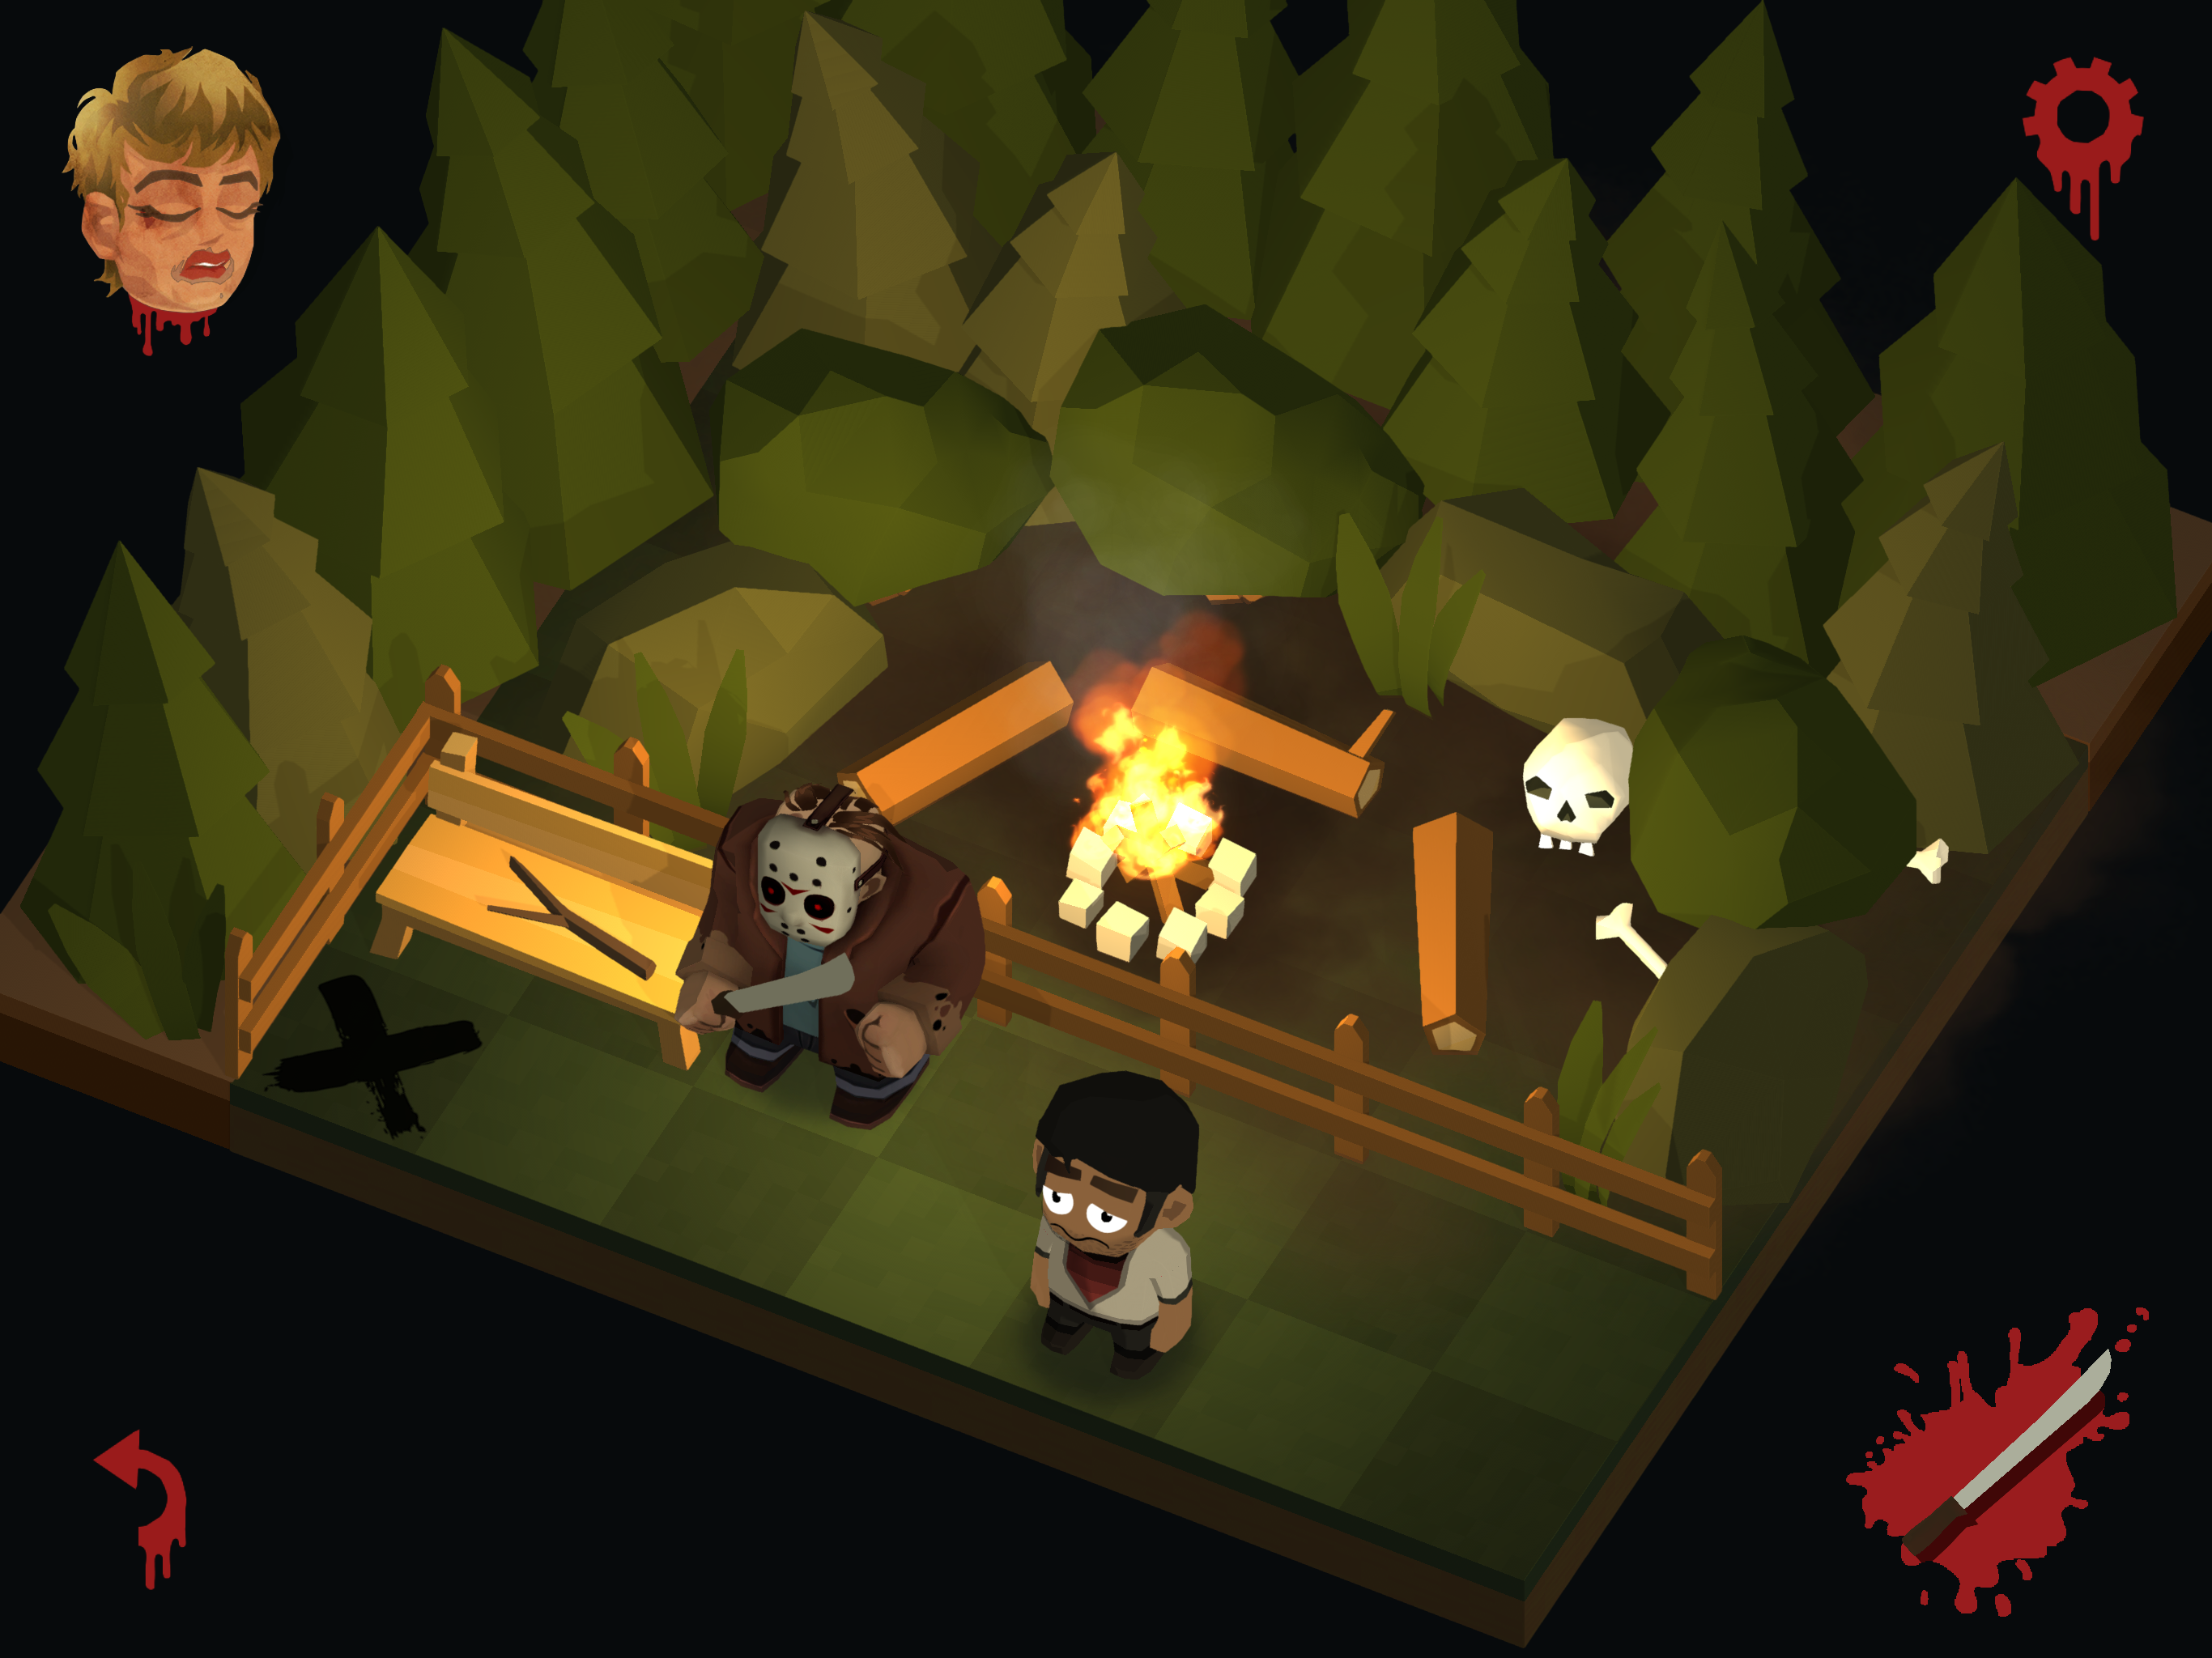 Friday The 13th Game APK 2.0 Free Download For Android